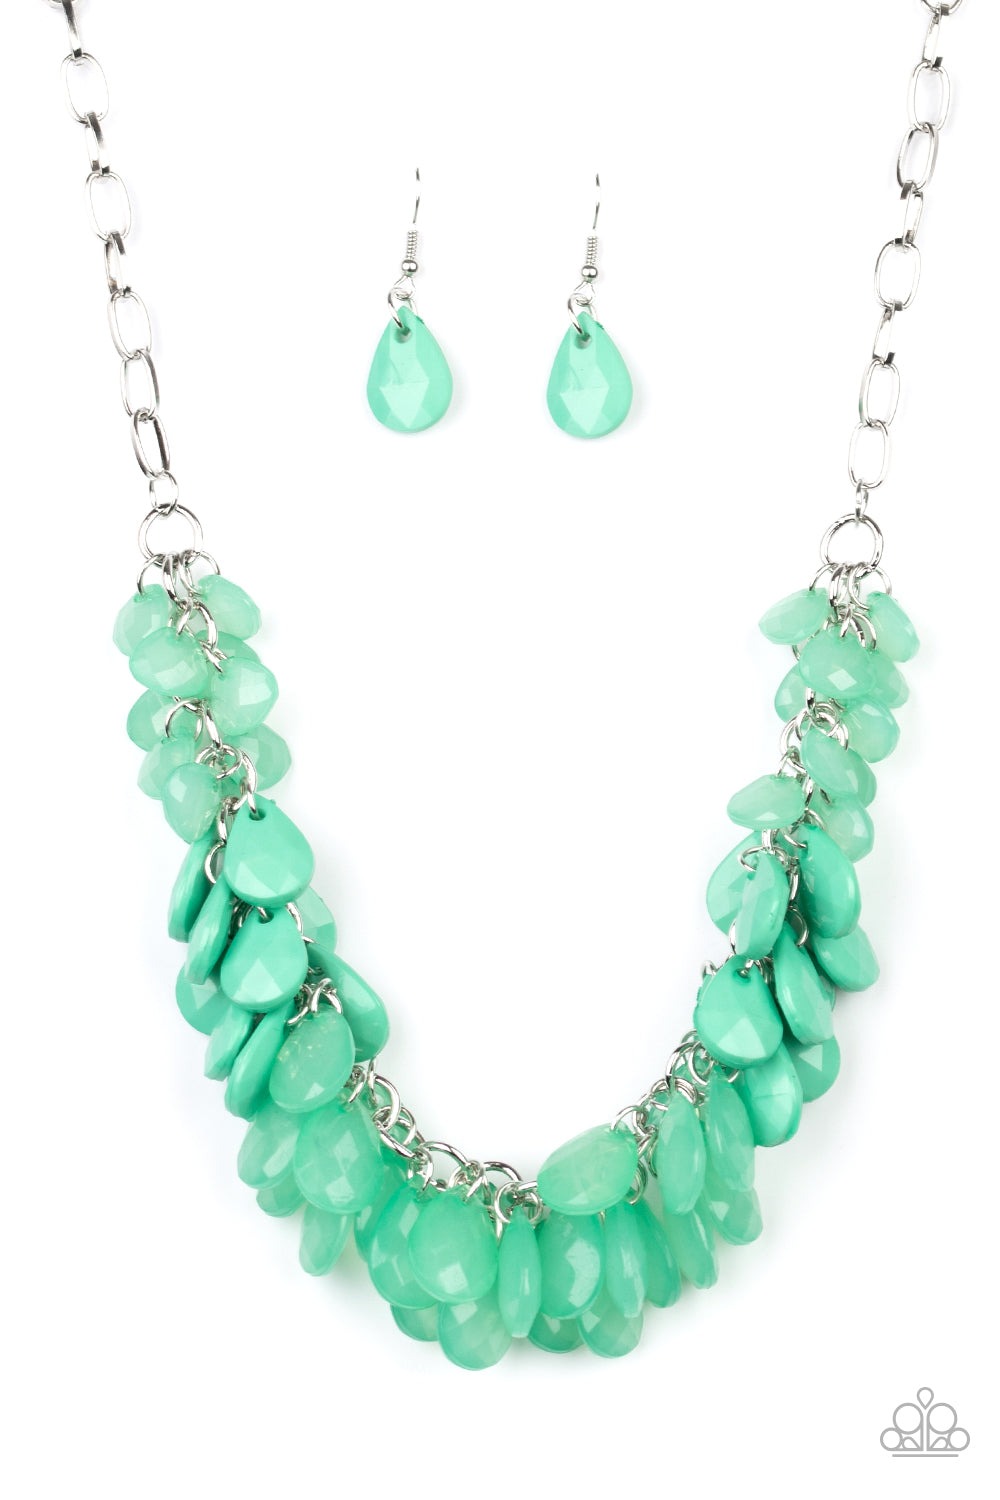 Colorfully Clustered-Green Necklace - Gtdazzlequeen